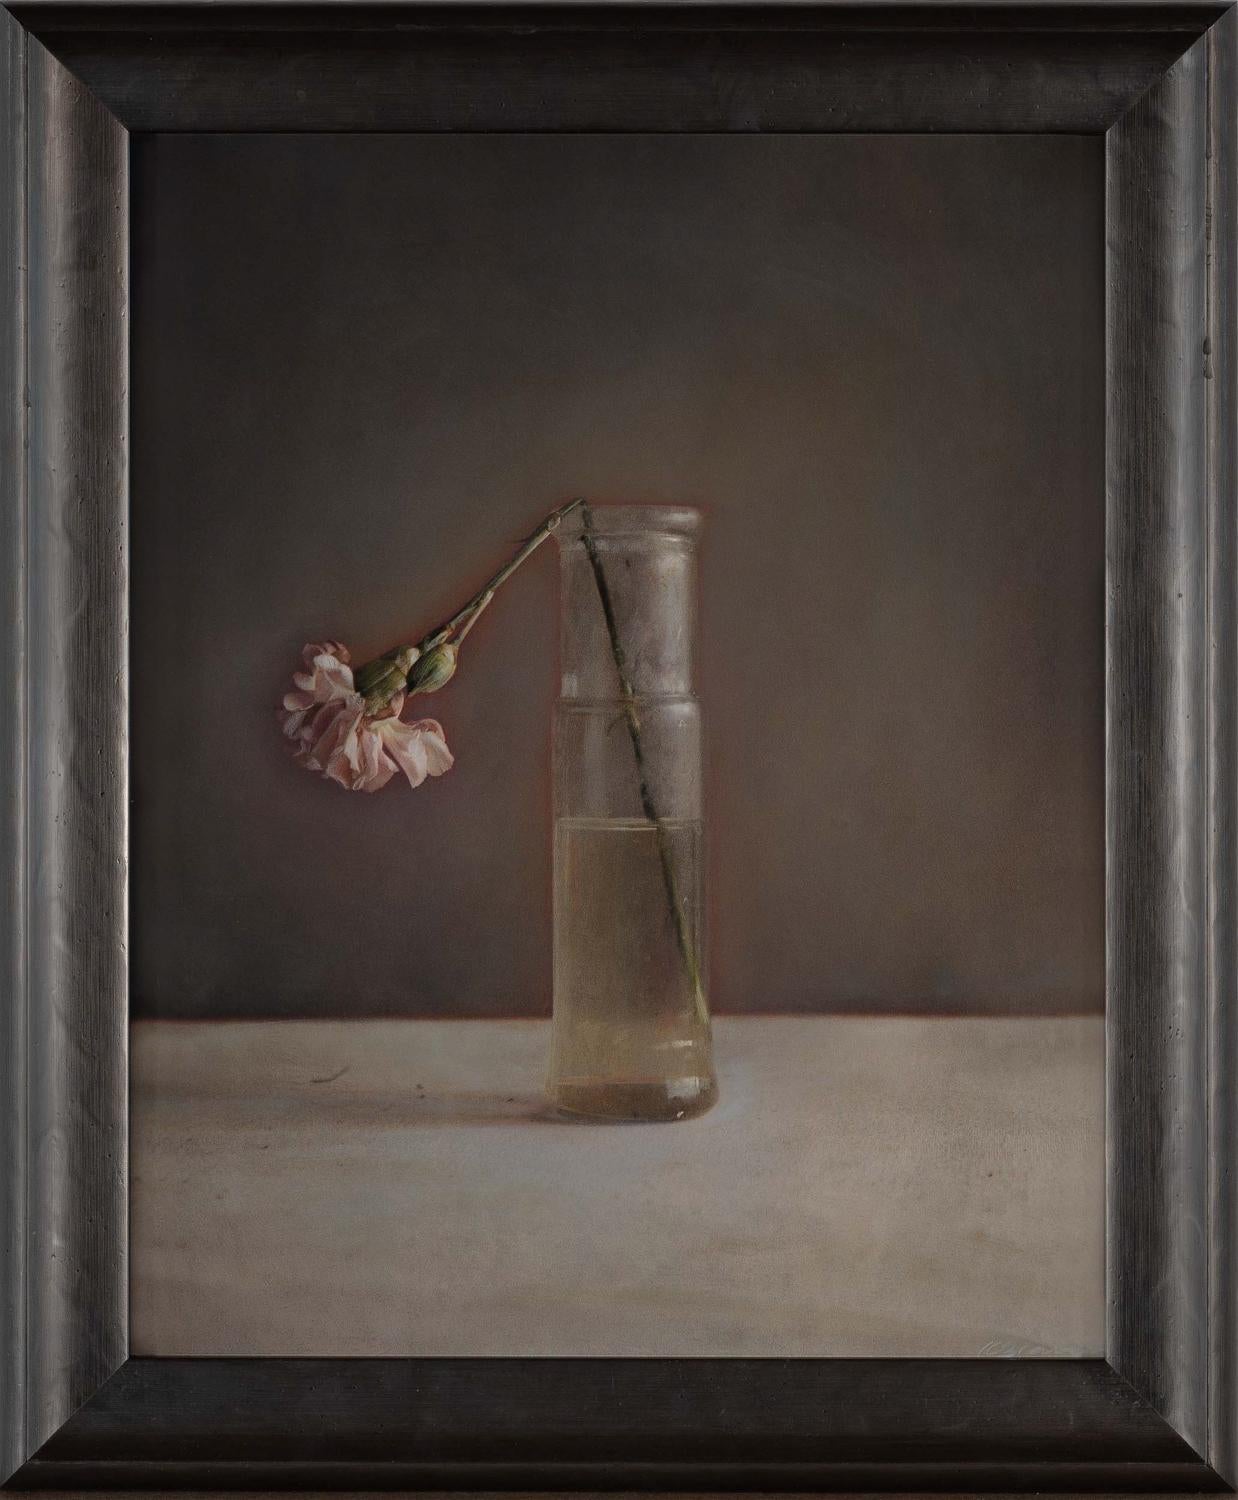 Kate Breakey Black and White Photograph - Carnation in a Bottle